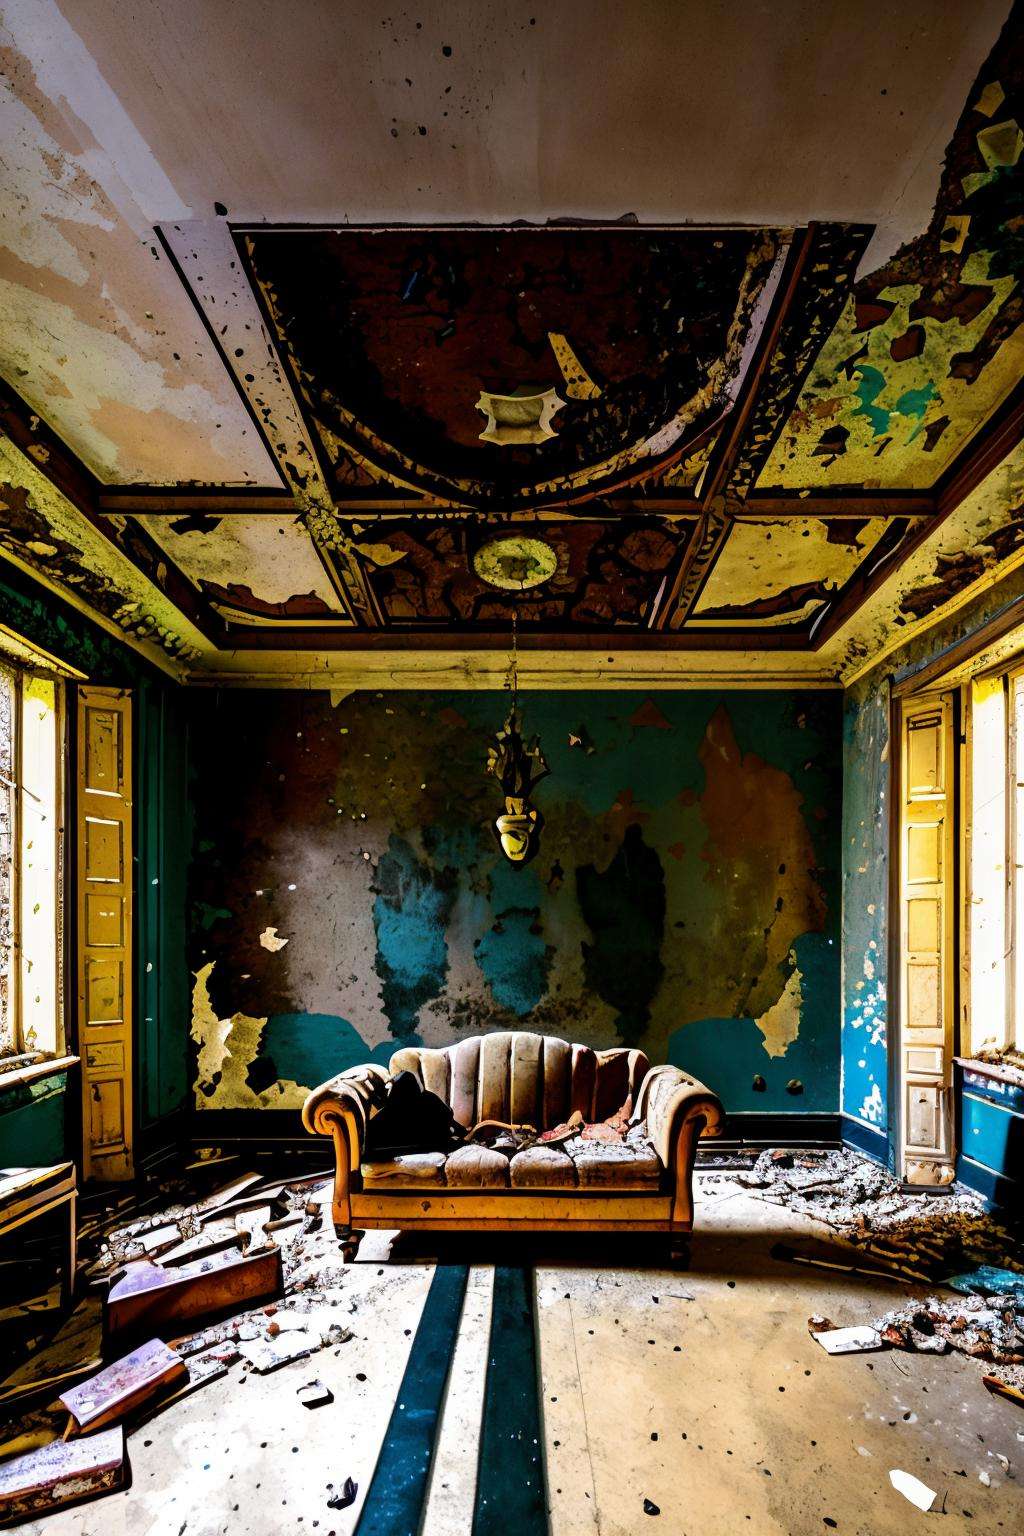 a room with a couch and a bunch of debris on the floor and walls and a ceiling with a painting, Andrea Pozzo, decay, a flemish Baroque, neoclassicism ,  abandoned_style